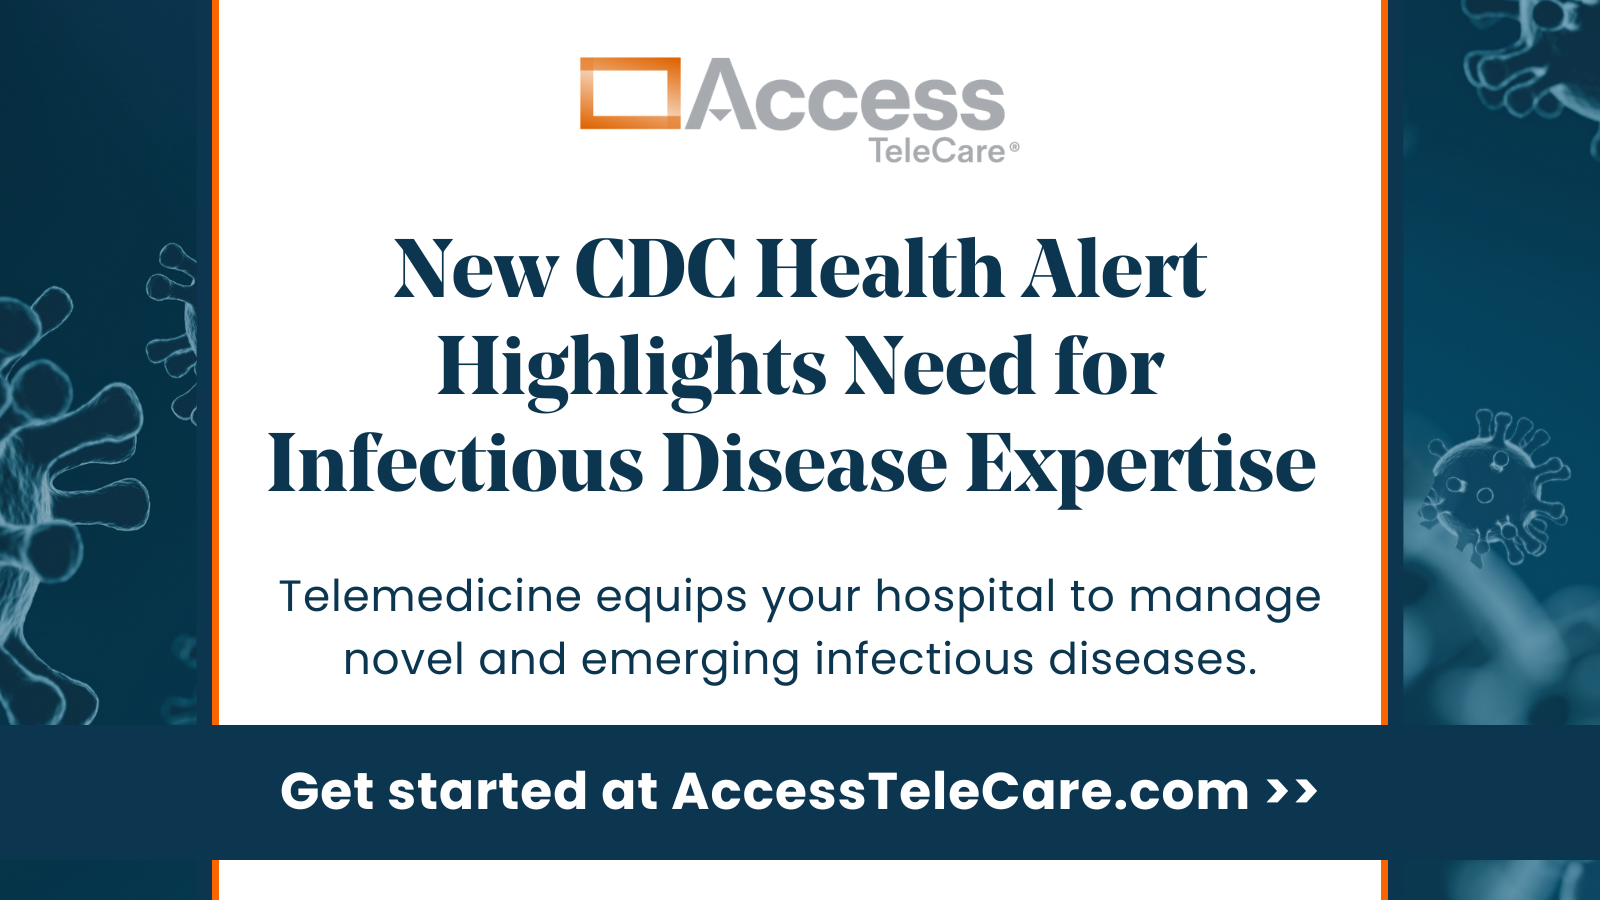 New CDC Alert highlights need for Access TeleCare infectious disease programs